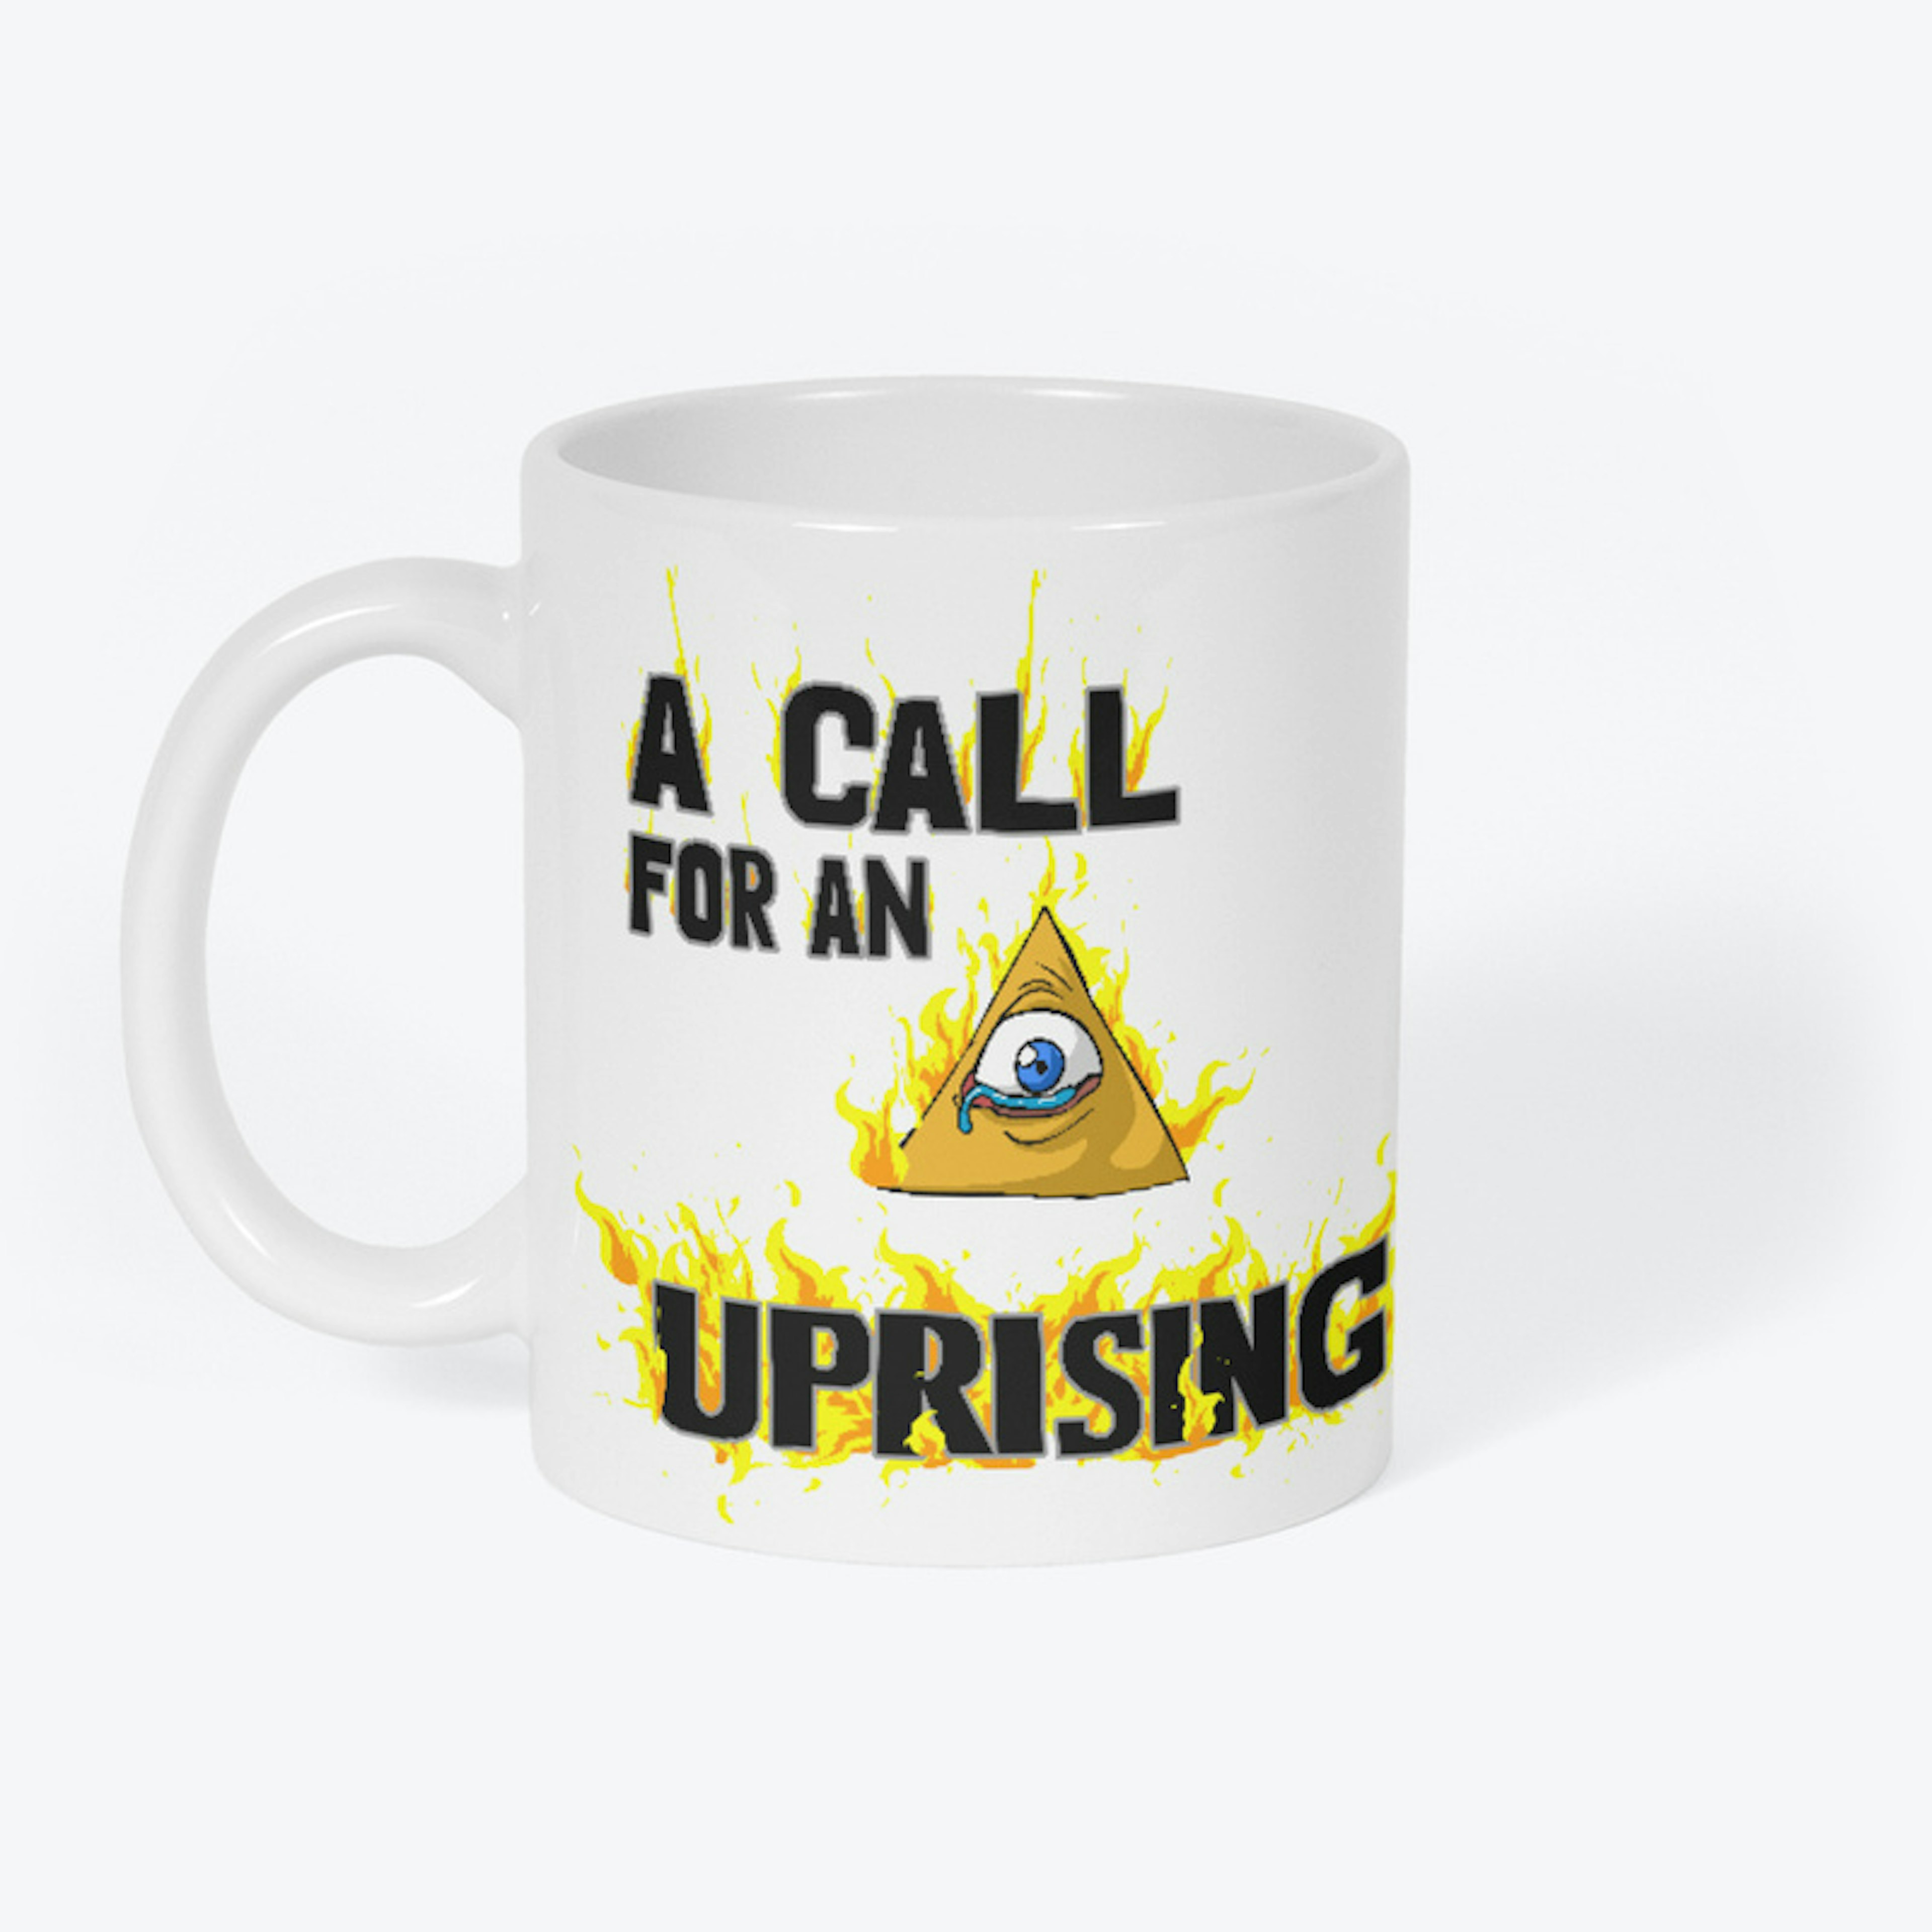 A CALL FOR AN UPRISING